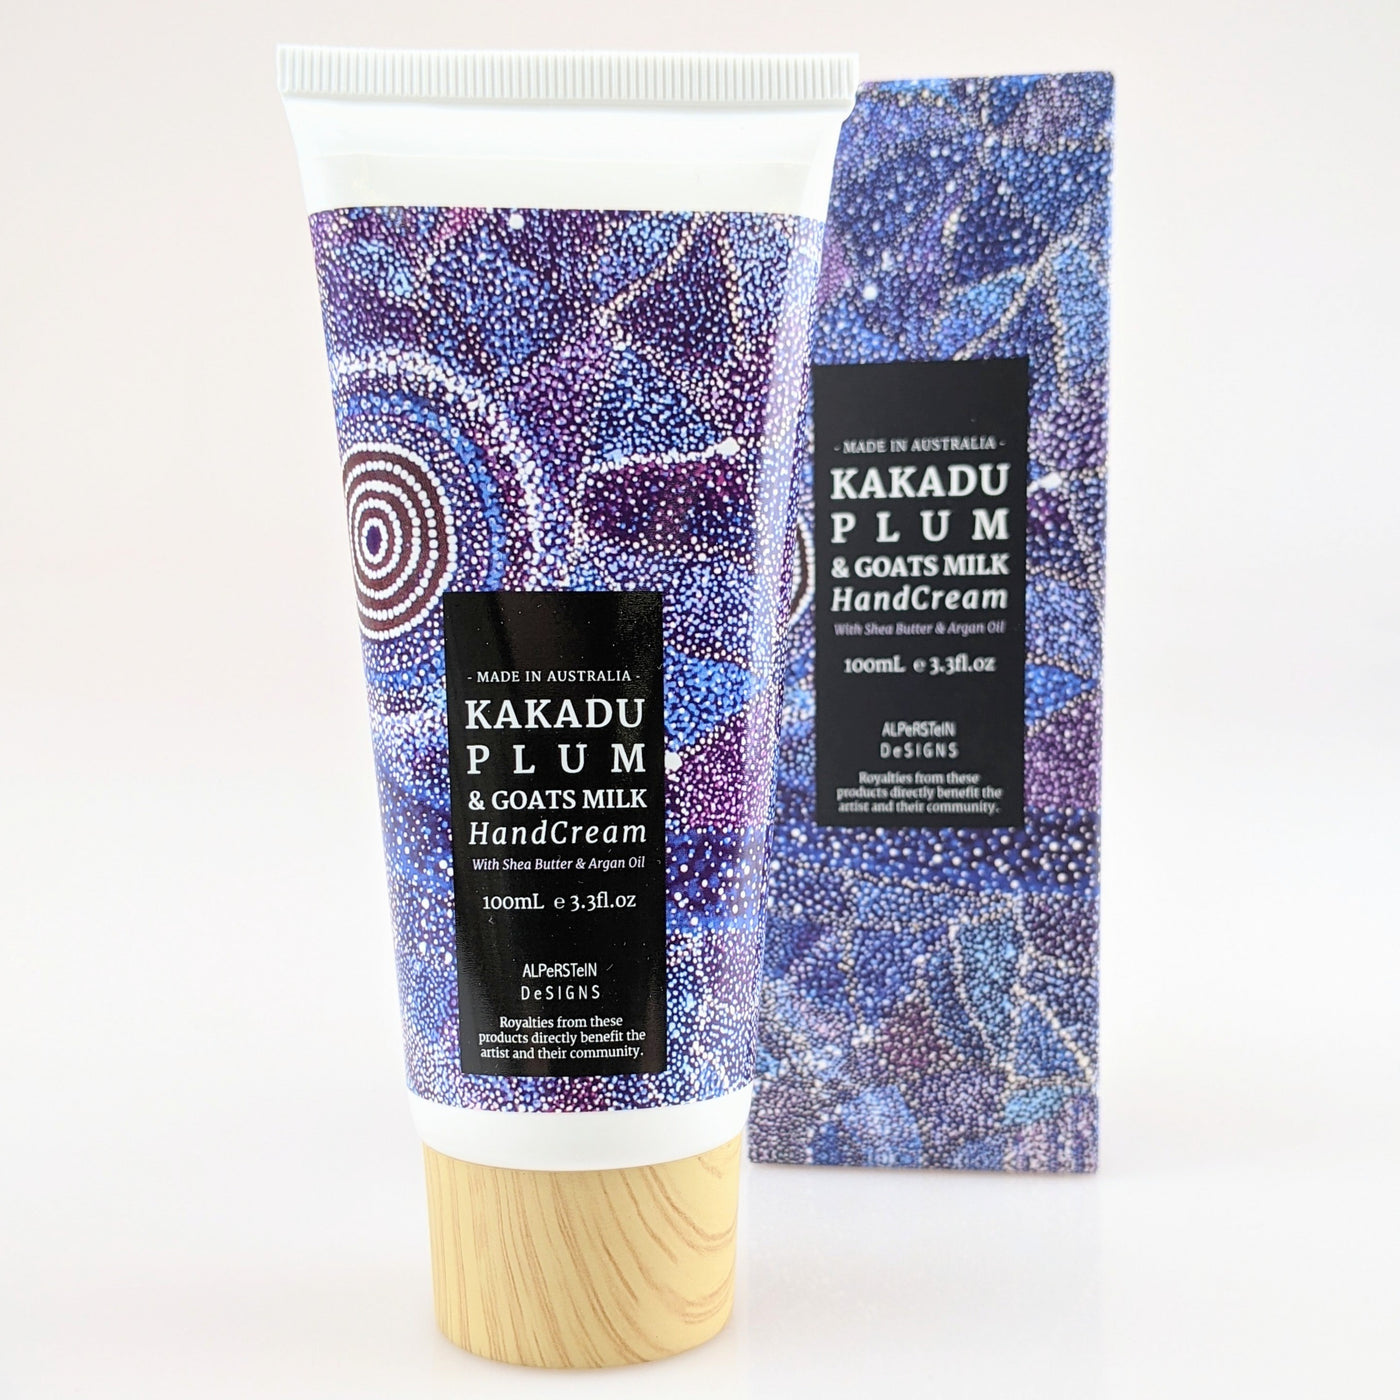 Hand cream in bottle with Indigenous artwork on packaging.